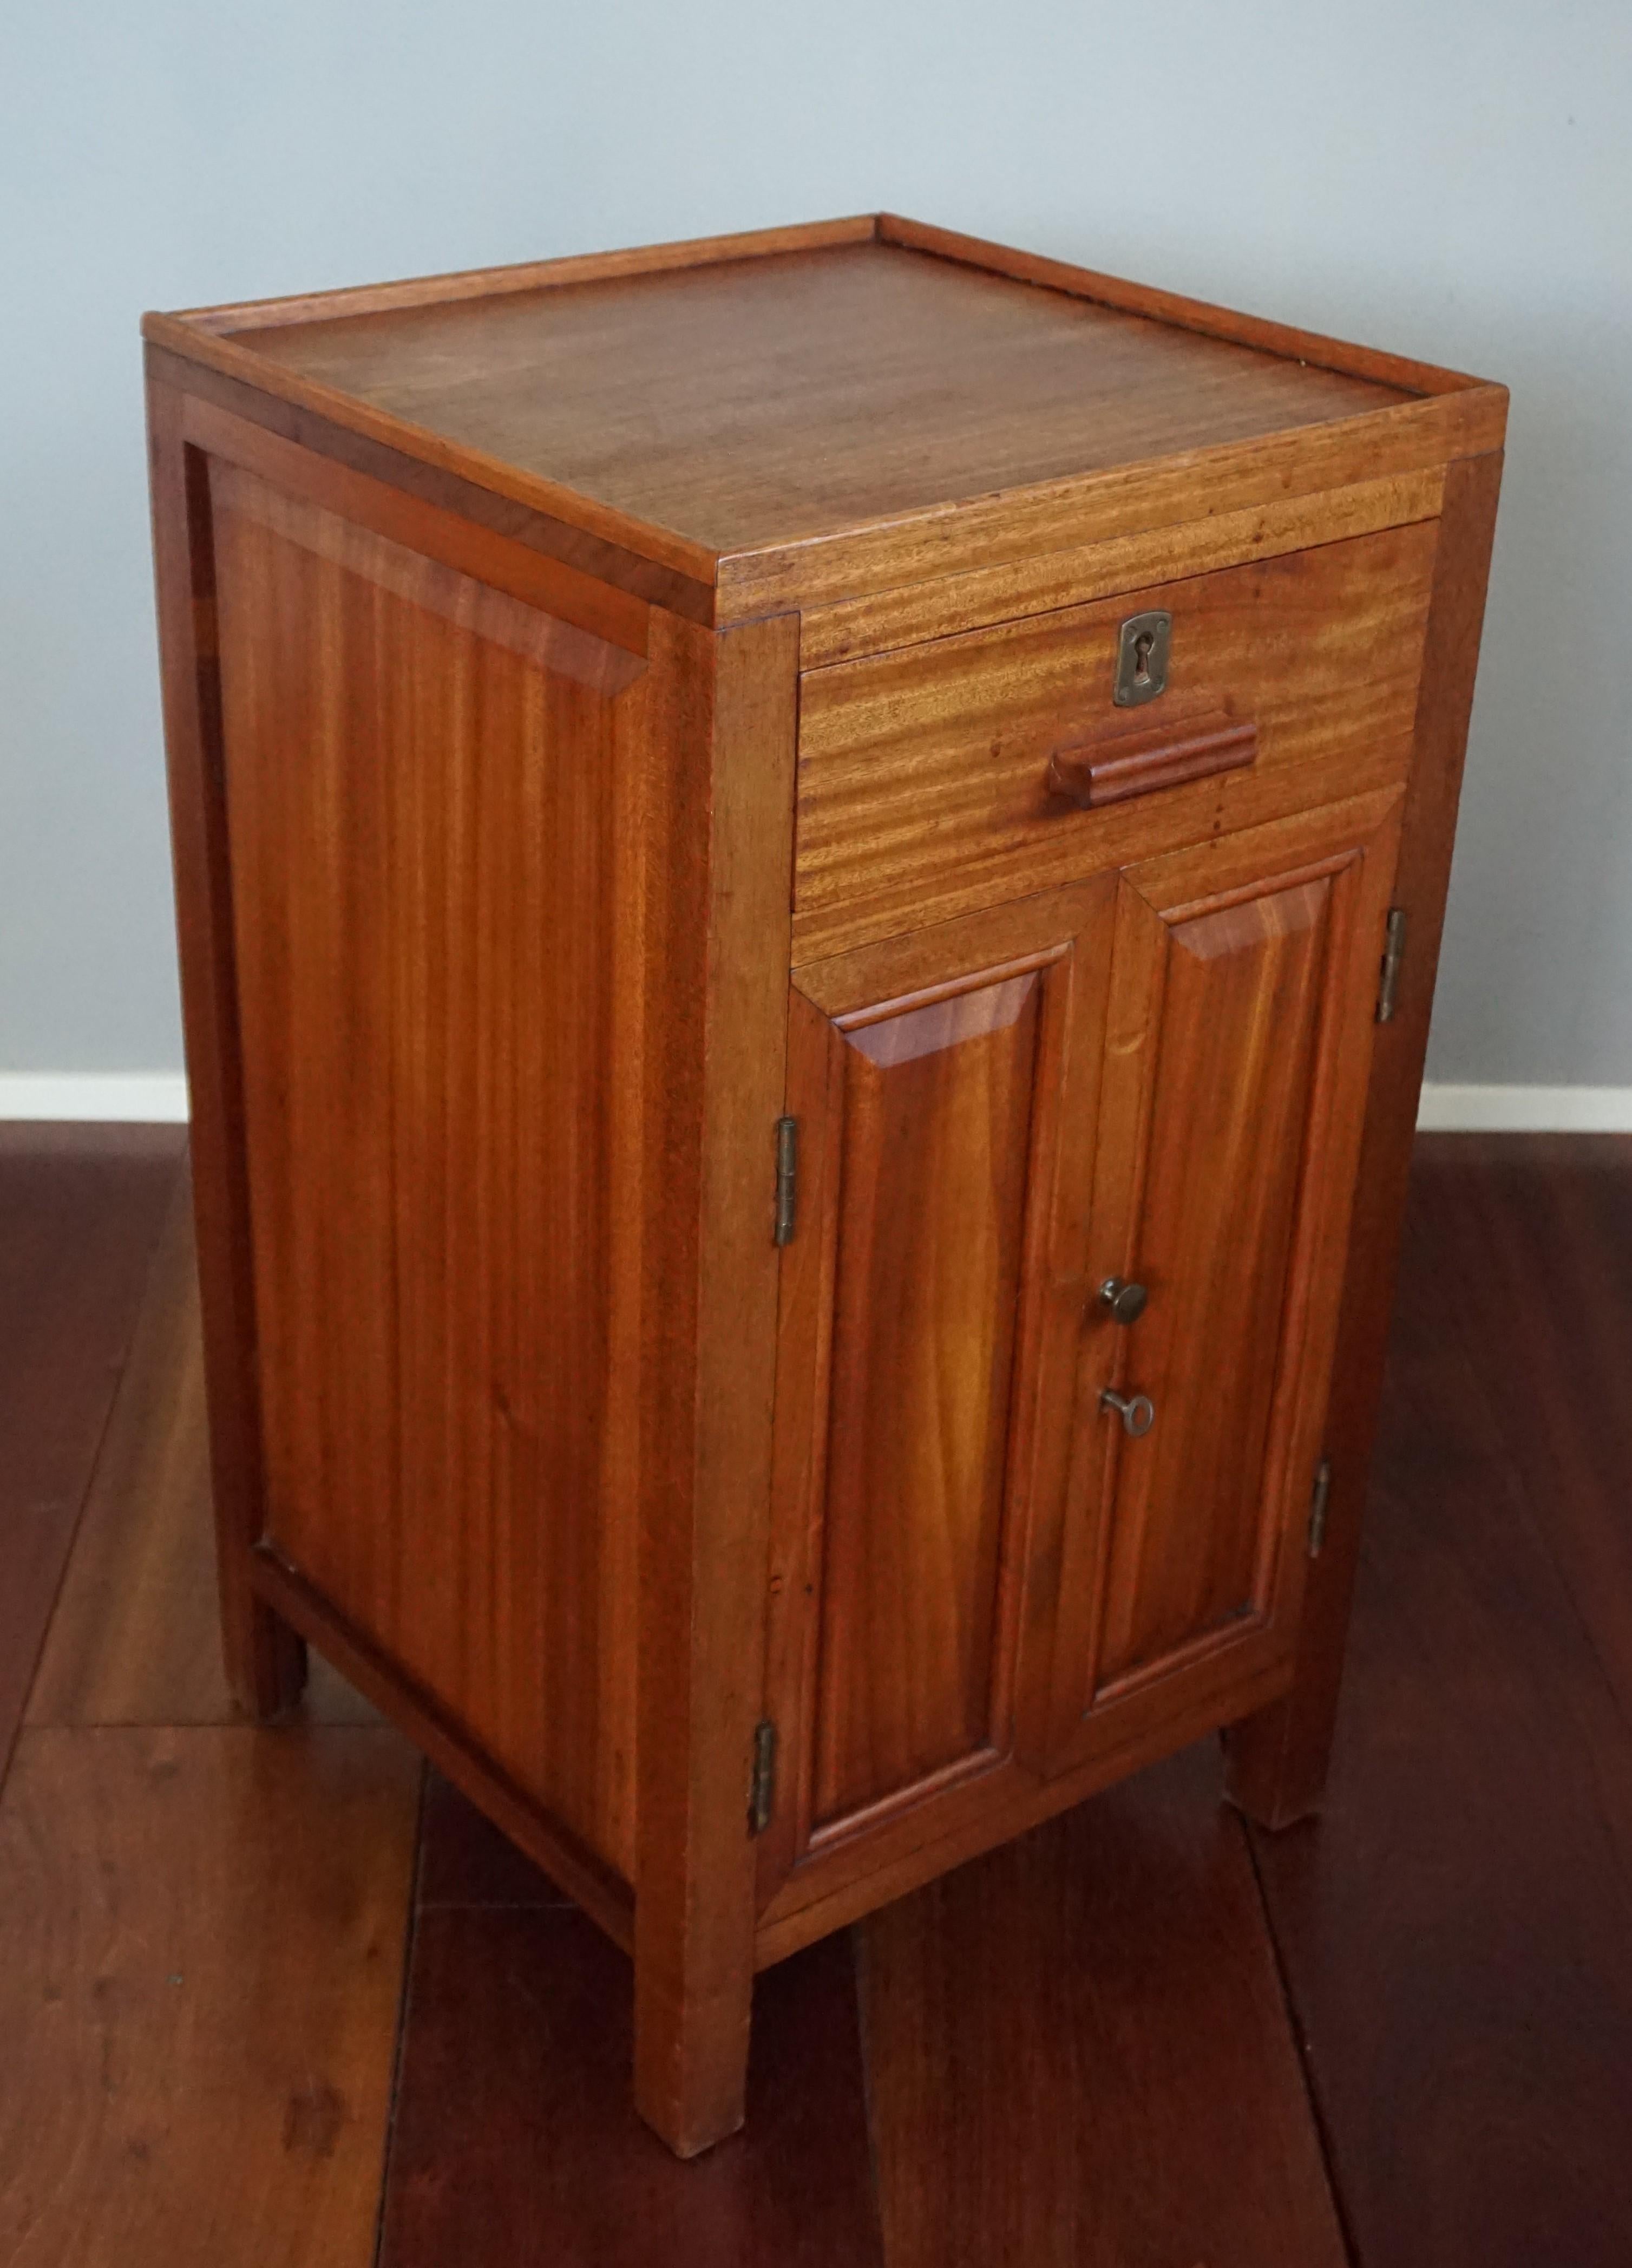 Rare, beautiful color and stylish design cabinet for all kinds of purposes. 

This handcrafted cabinet from the 1920s is beautifully angular in design and it is made of the finest quality and color teakwood. Made of solid teakwood with a marvelous